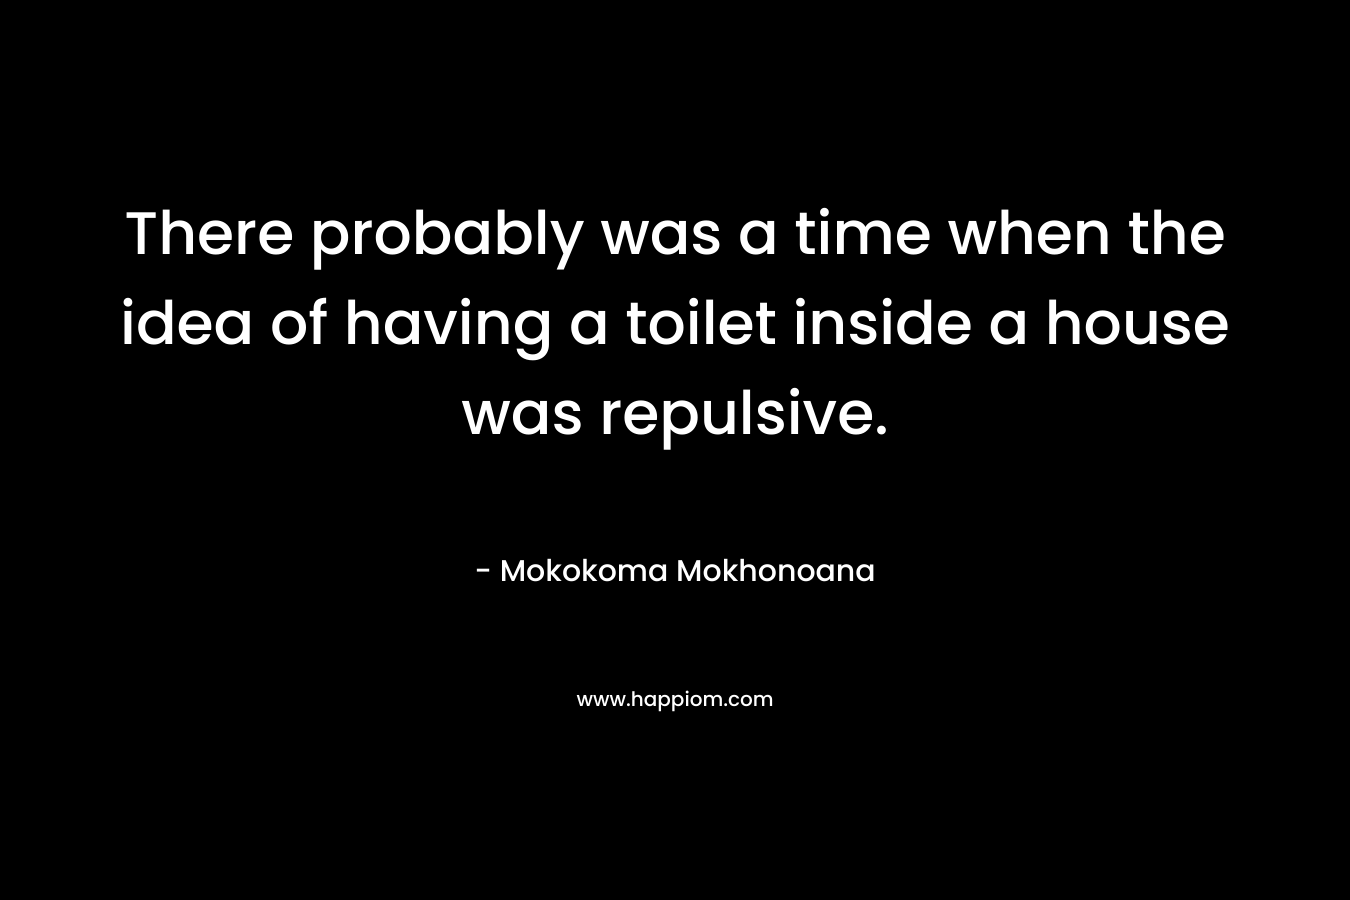 There probably was a time when the idea of having a toilet inside a house was repulsive.